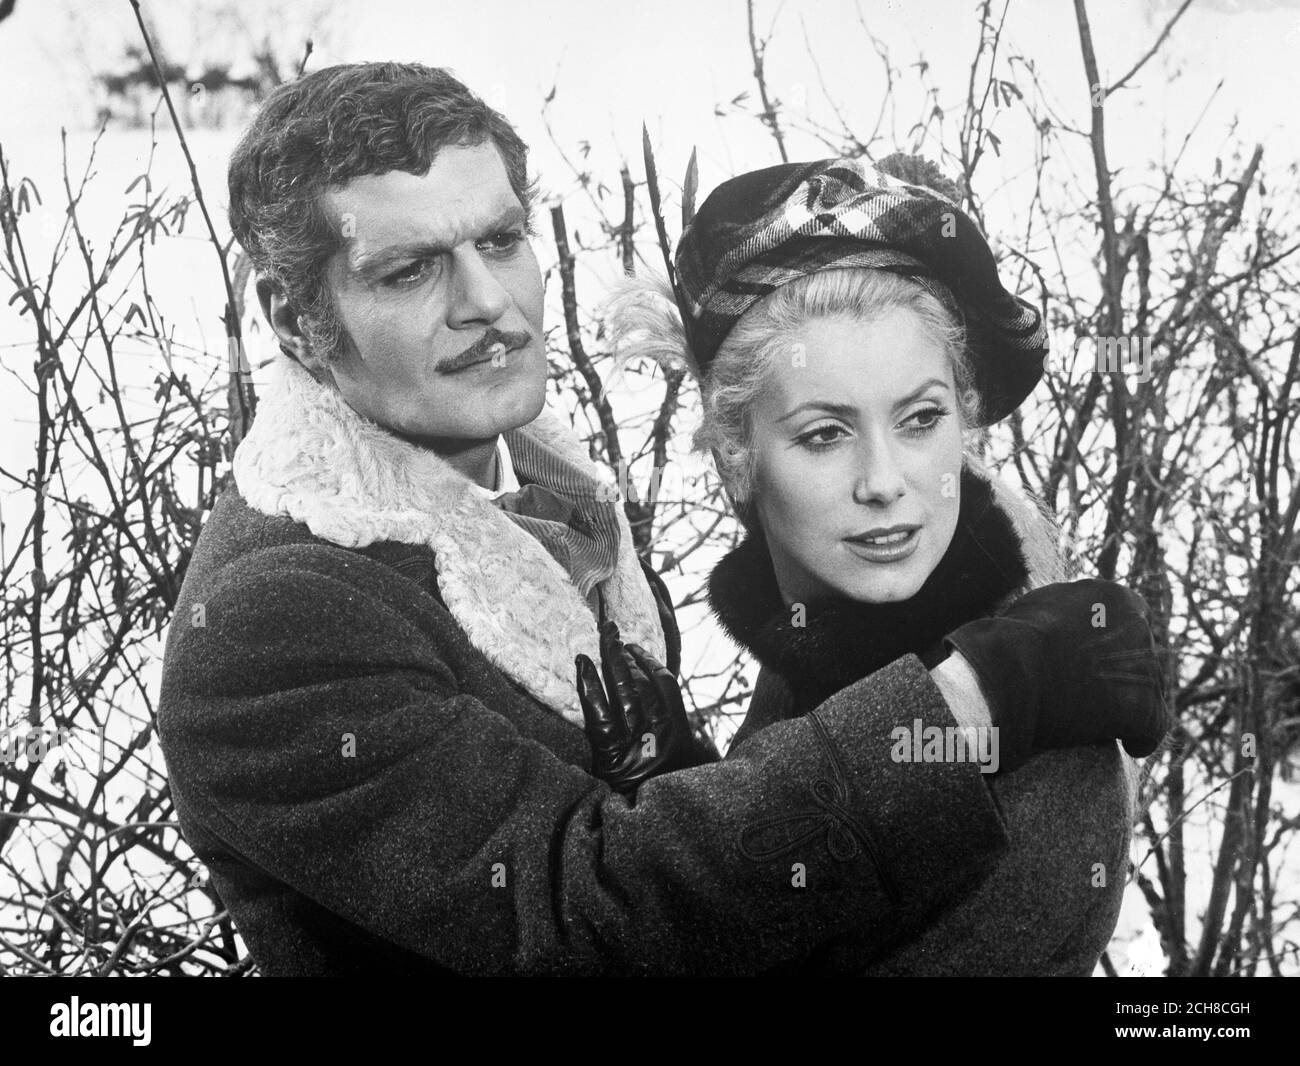 Omar Sharif and Catherine Deneuve in their starring roles as Crown Prince Rudolph of Austria and his young mistress Mary Vetsera in 'Mayerling', a new film of a love story that ended in tragedy in 1889. Stock Photo